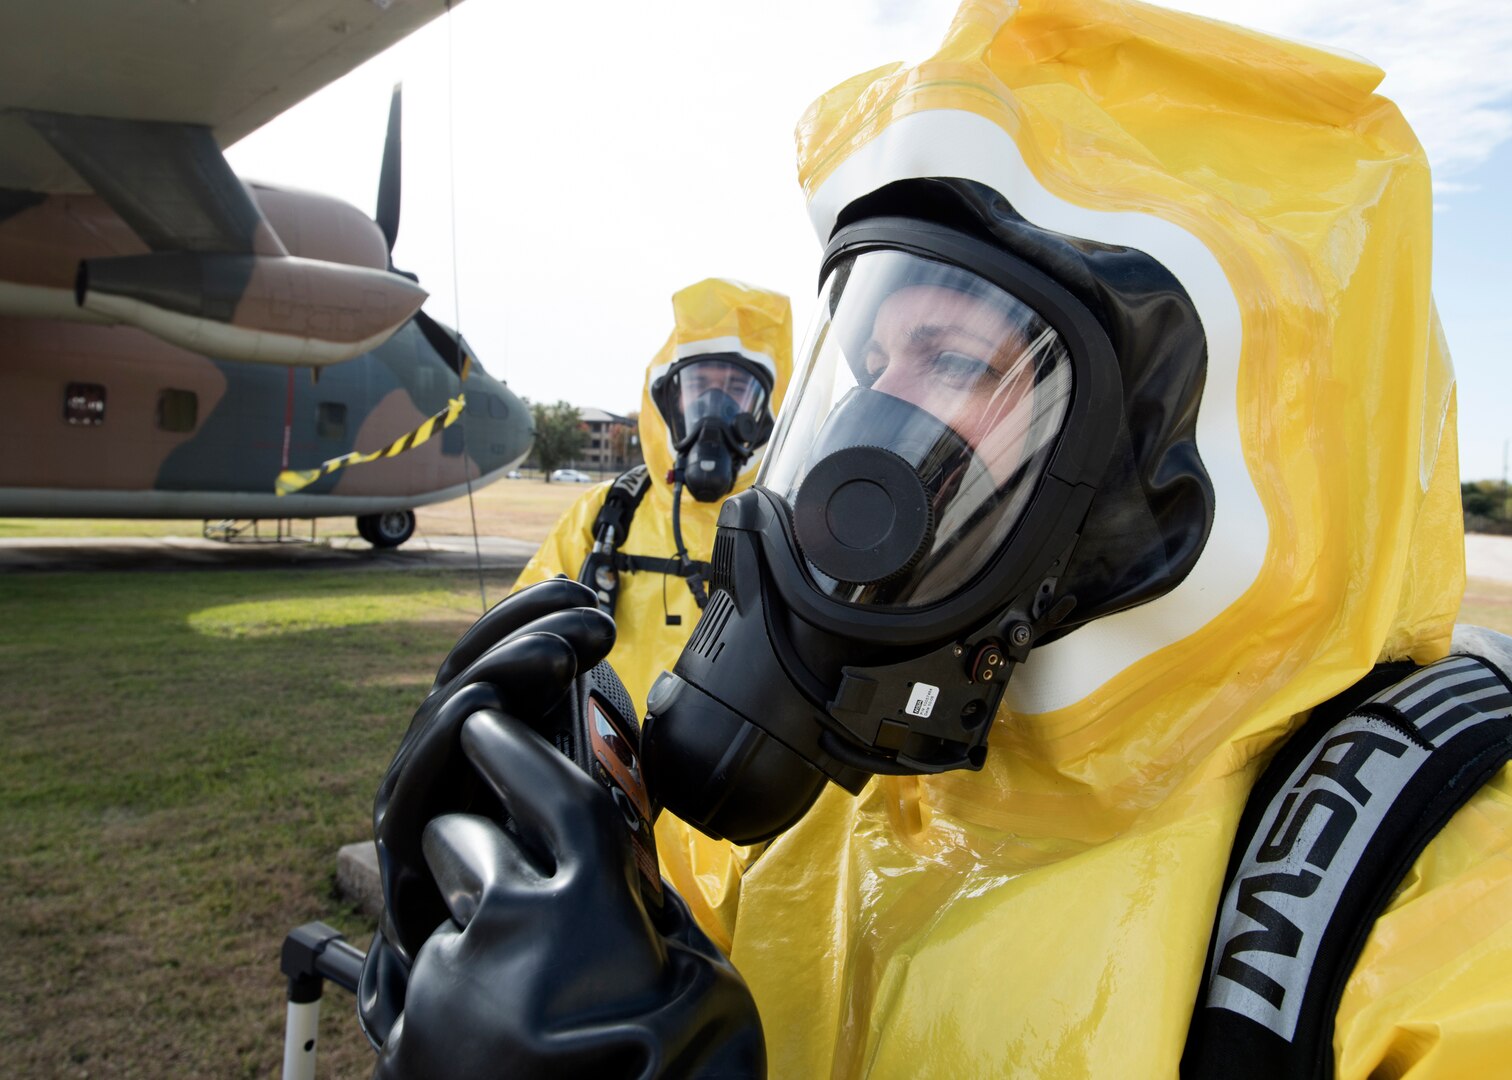 59th Medical Wing bioenvironmental engineers call in a contamination emergency during a MASCAL exercise on Joint Base San Antonio-Lackland, Texas. The exercise tested the clinical and field response teams’ communication efficiency between wing personnel and the medical control center. (U.S. Air Force photo by Staff Sgt. Kevin Iinuma)